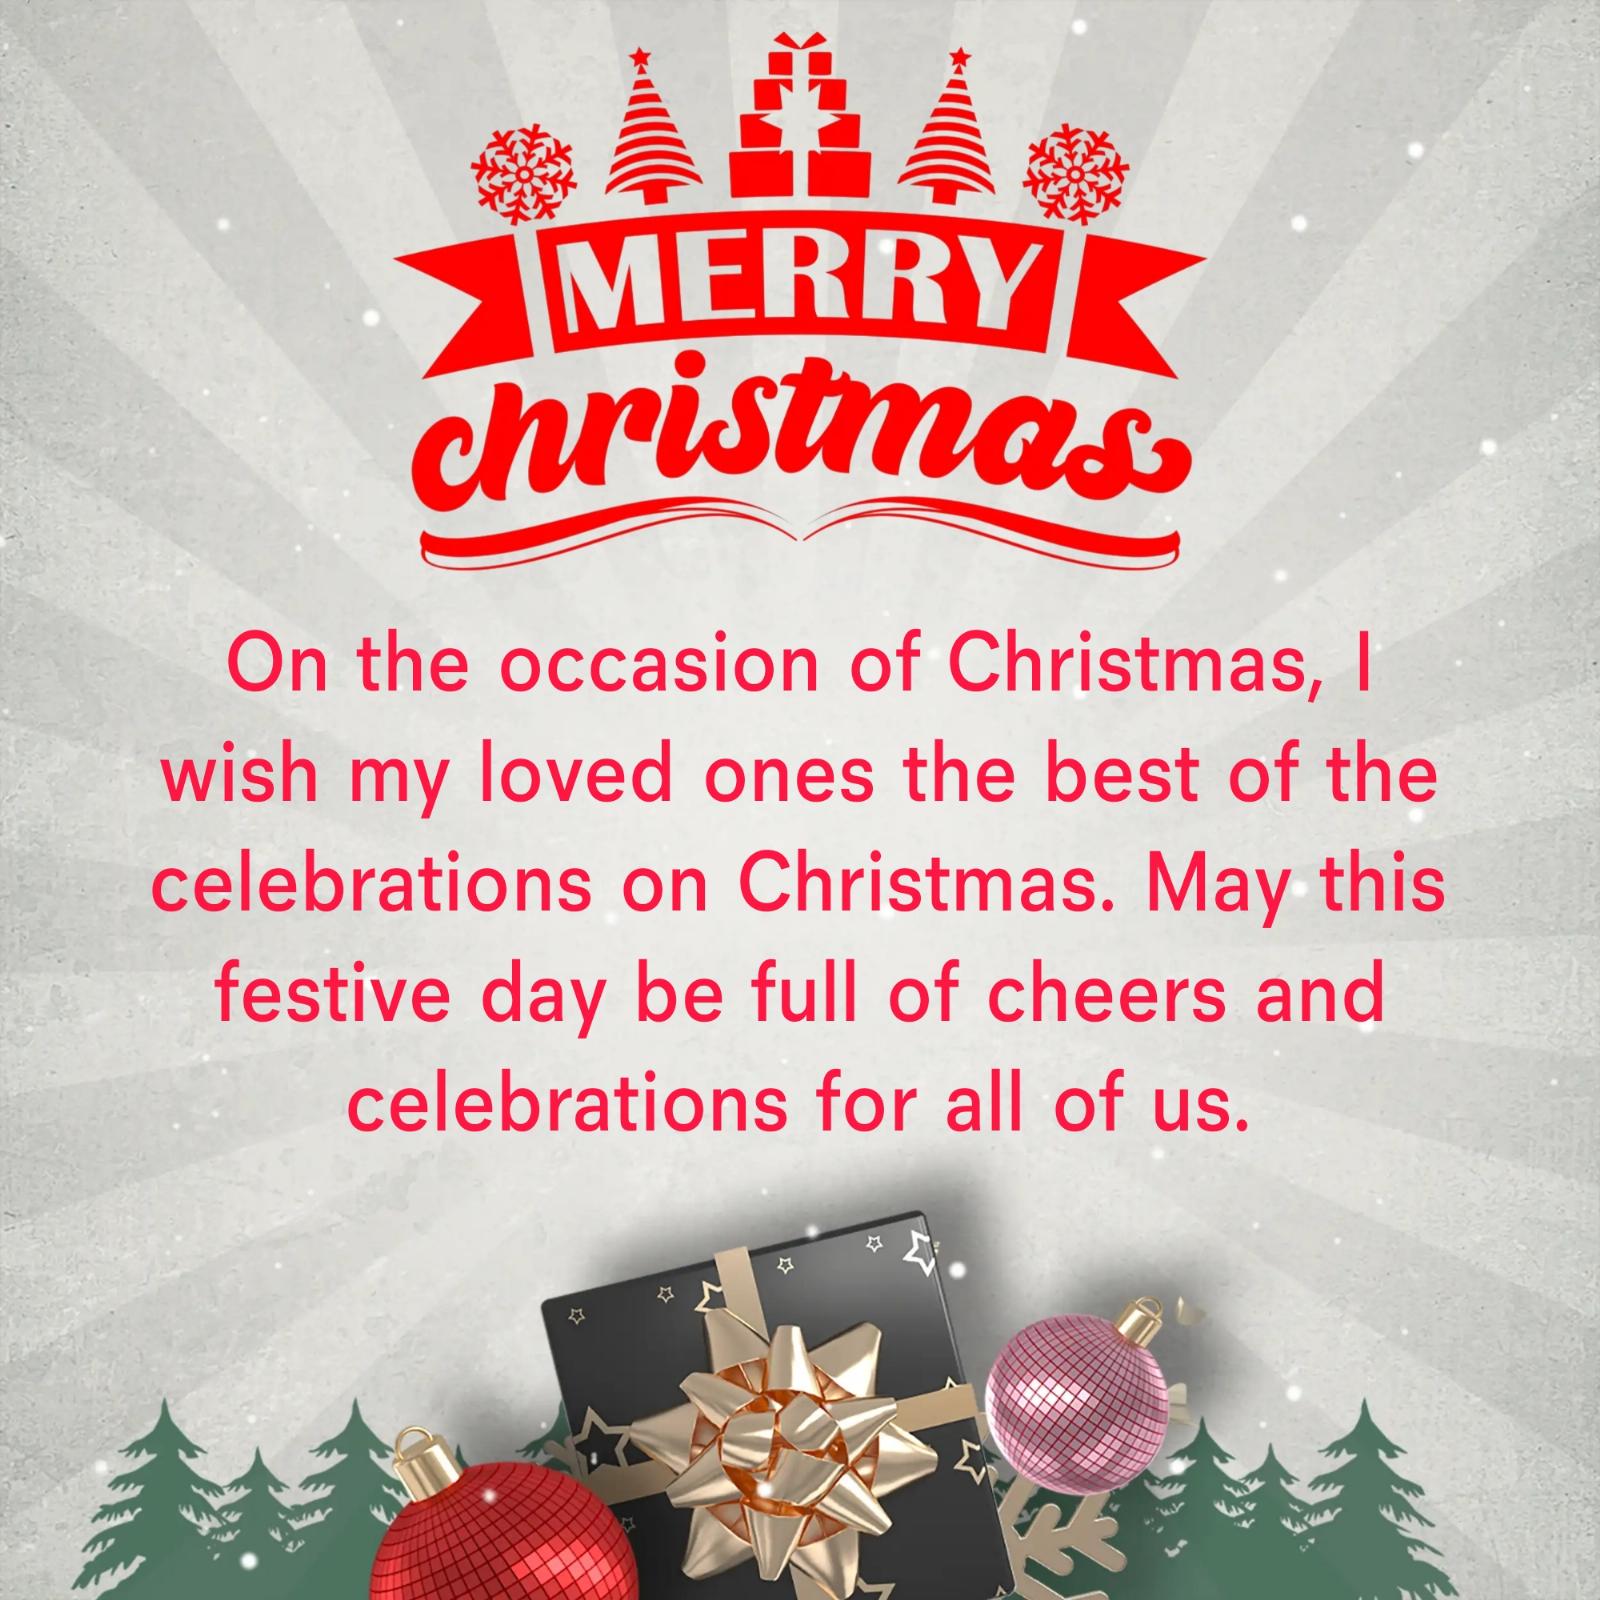 On the occasion of Christmas I wish my loved ones